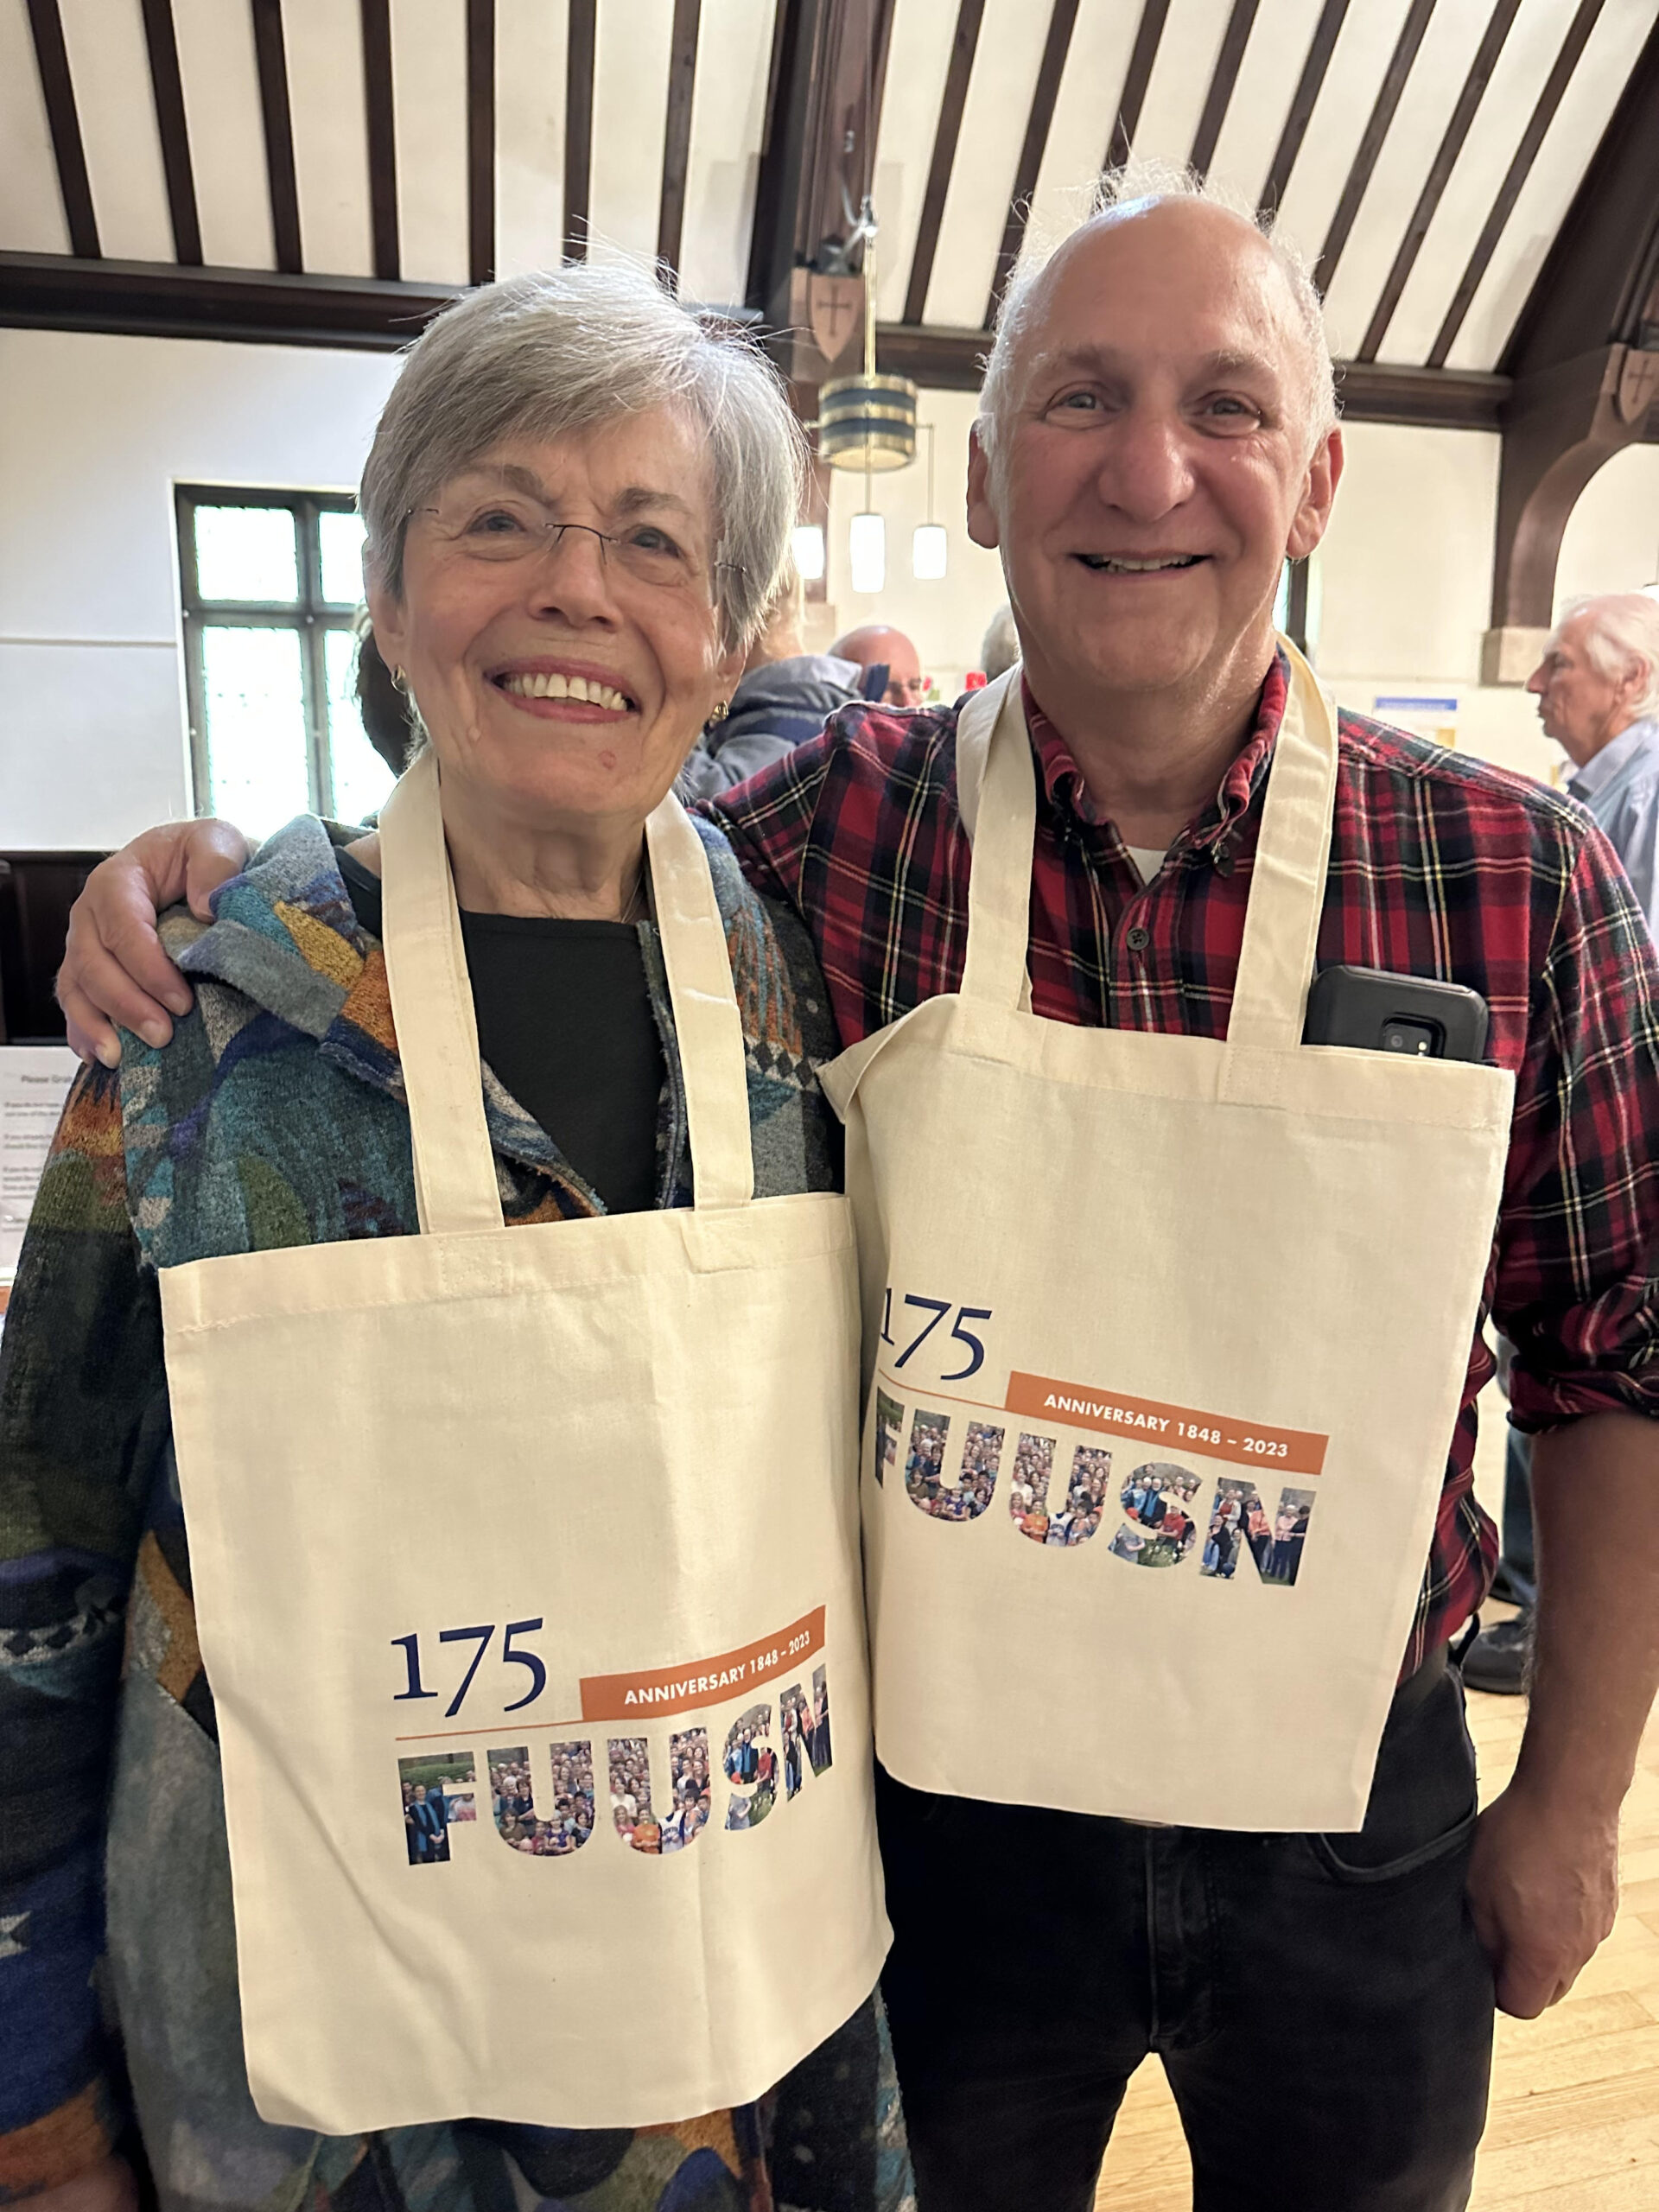 A man and a woman pose with 175th Anniversary tote bags hanging around their necks.